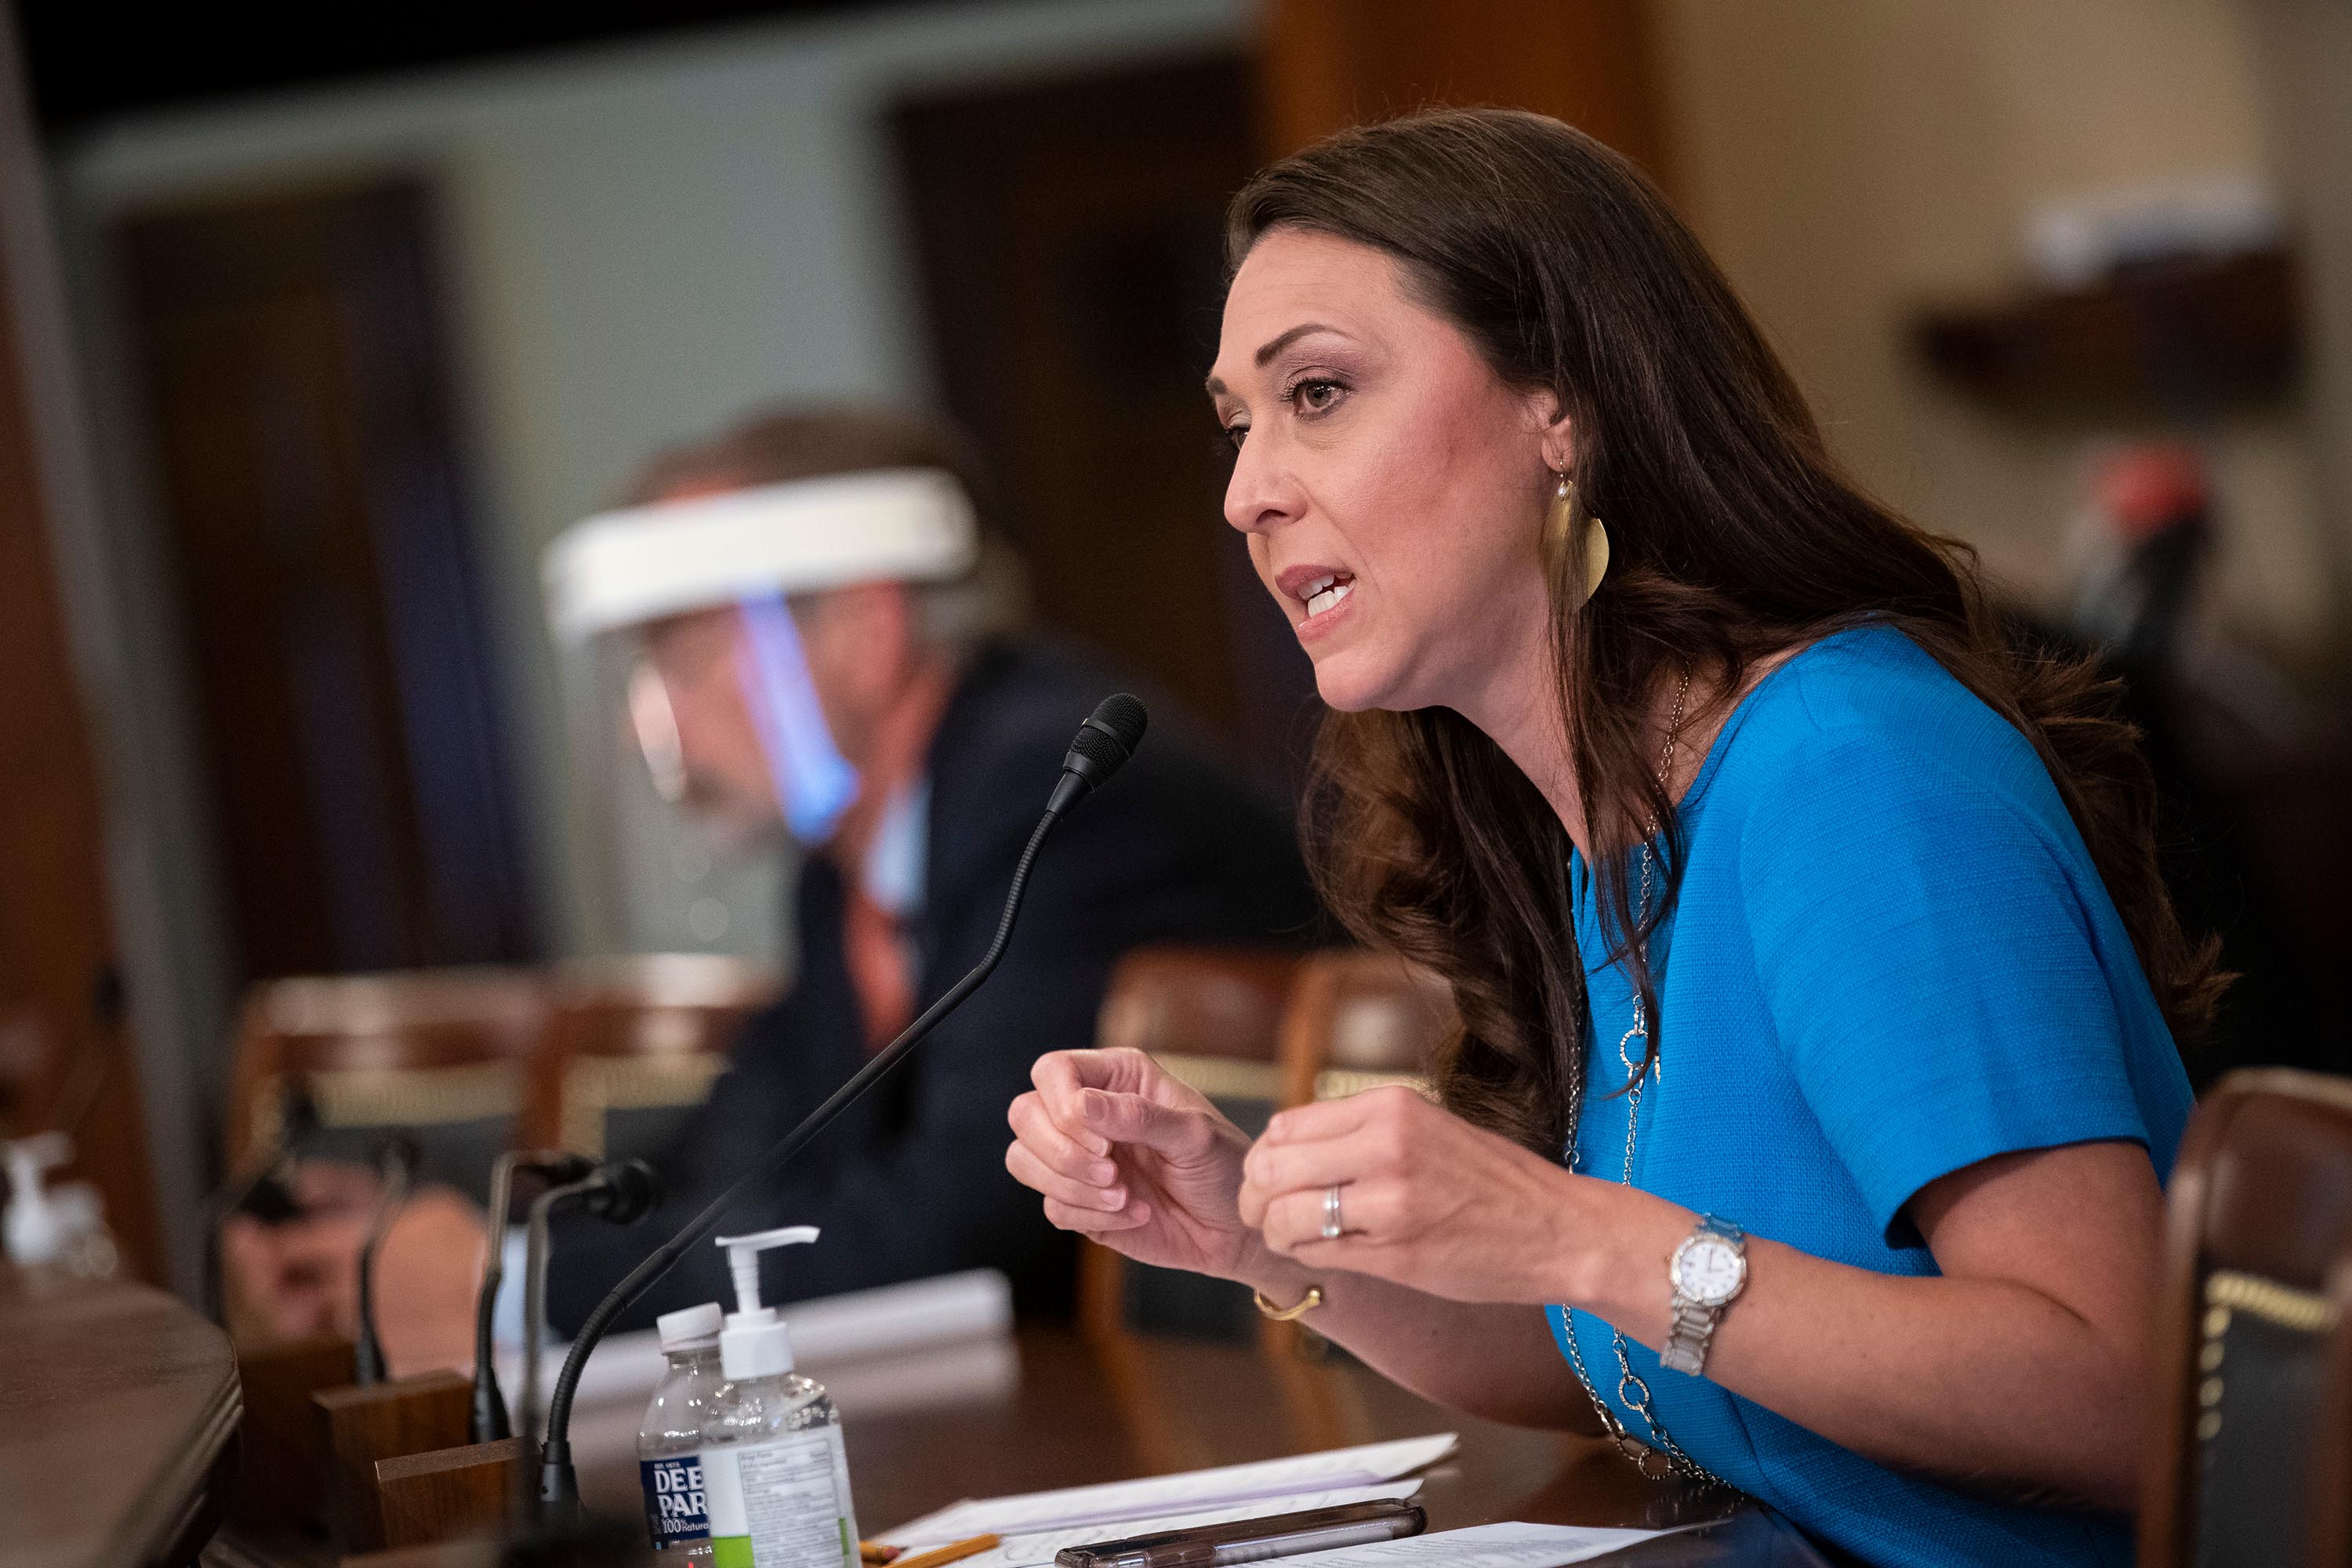 Rep. Jaime Herrera Beutler, a Republican from Washington, speaks during a House Appropriations Subcommittee hearing on Capitol Hill in June 2020.